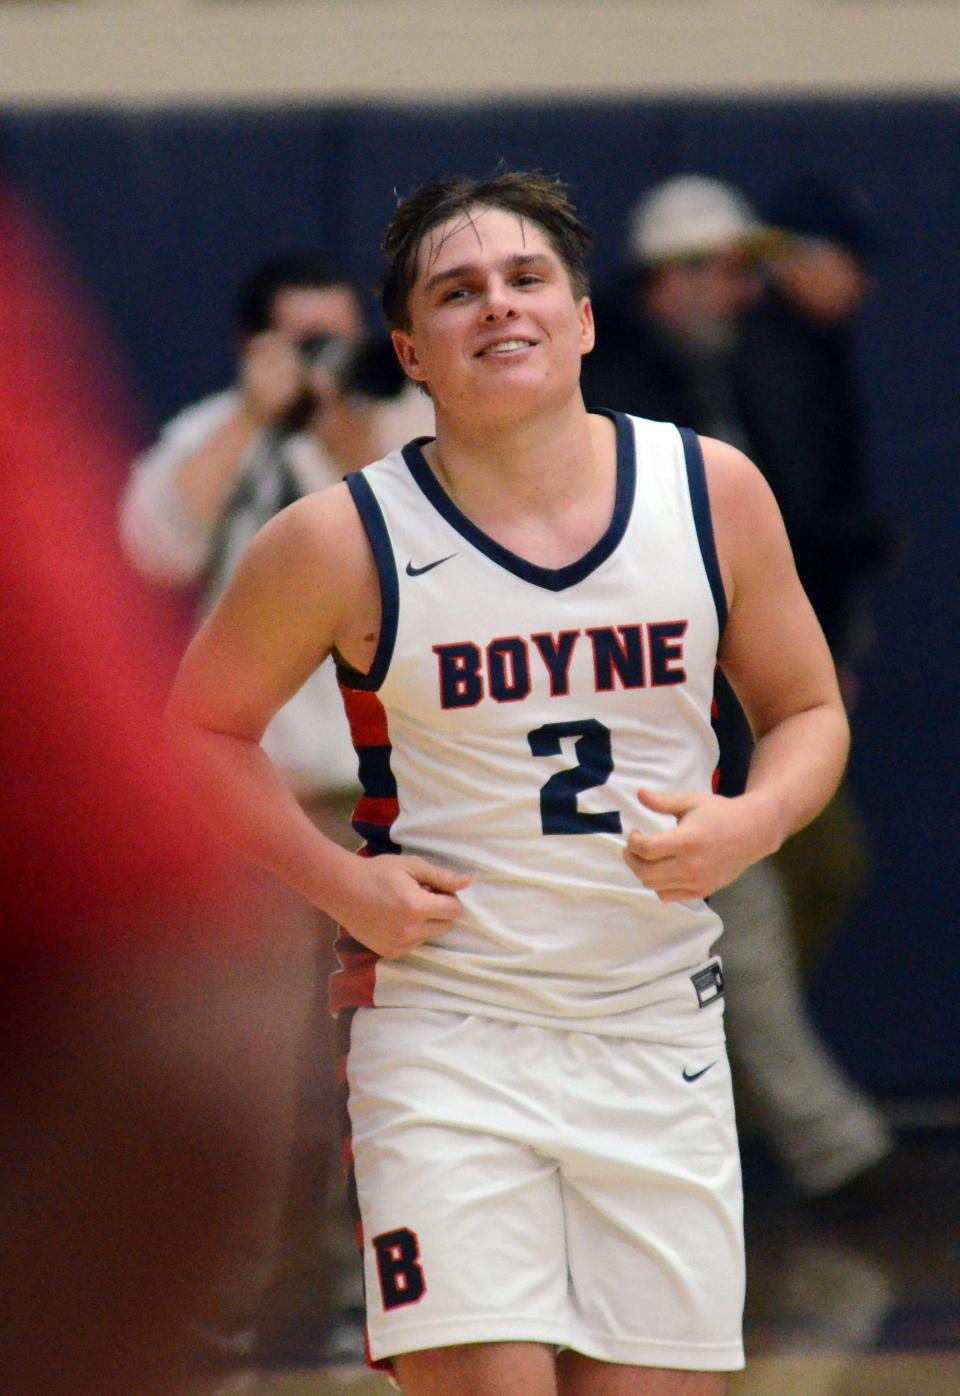 Boyne City's Jack Neer runs to the hand shaking line following a celebration on the court after the final buzzer.